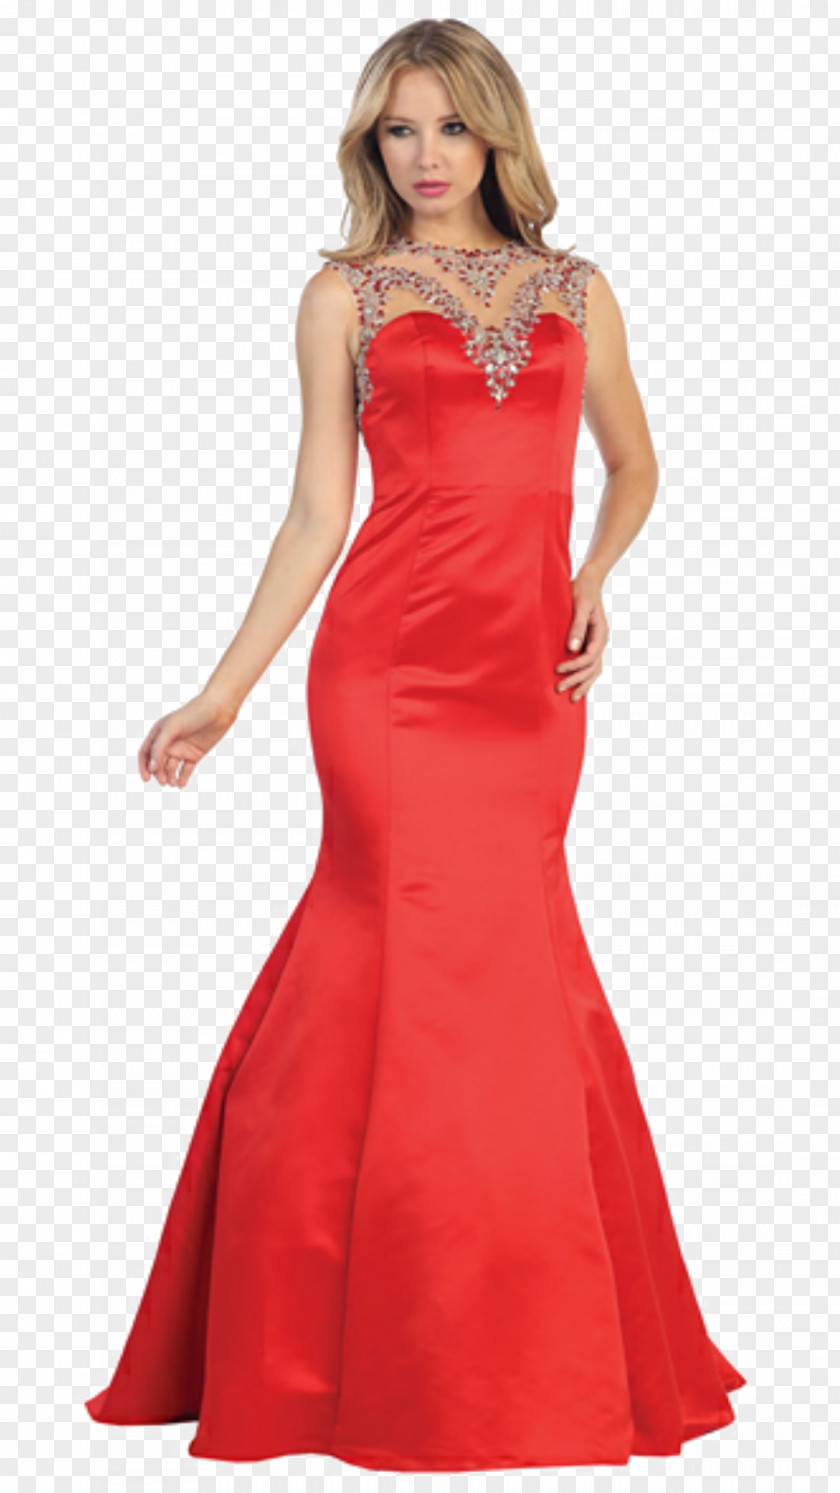 Dress Cocktail Prom Evening Gown Wedding PNG